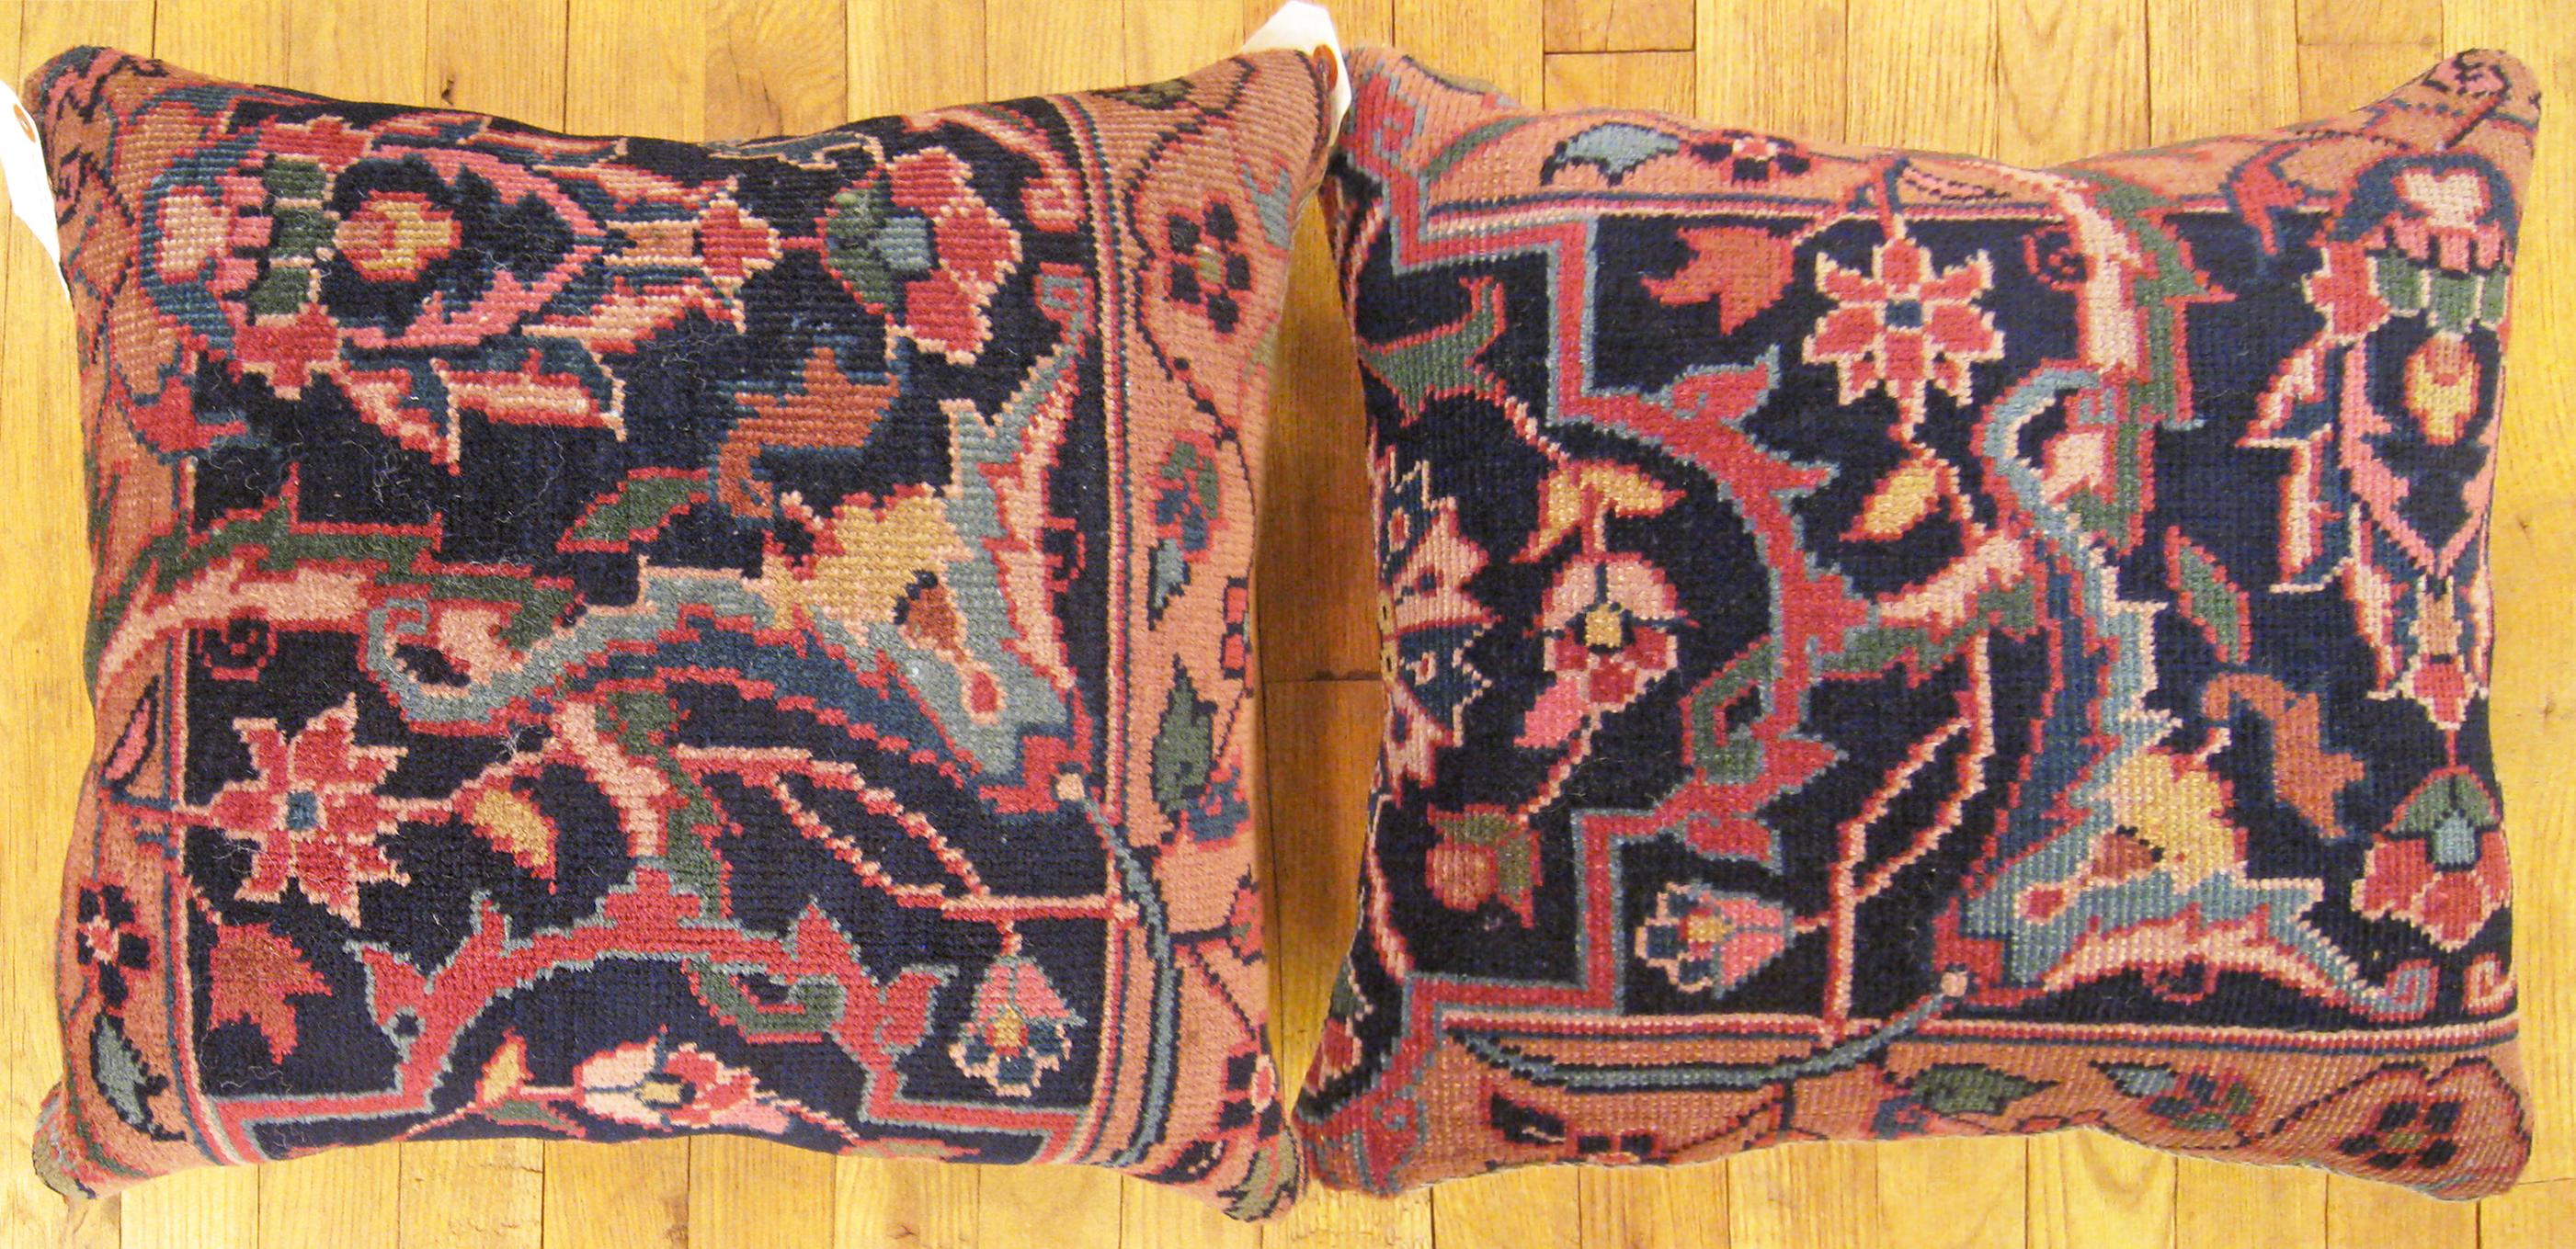 A Pair of Antique Indian Agra Rug Pillows ; size 1'6” x 1'4” Each.

An antique decorative pillows with floral elements allover a coral central field, size 1'6” x 1'4” each. This lovely decorative pillow features an antique fabric of a Agra rug on